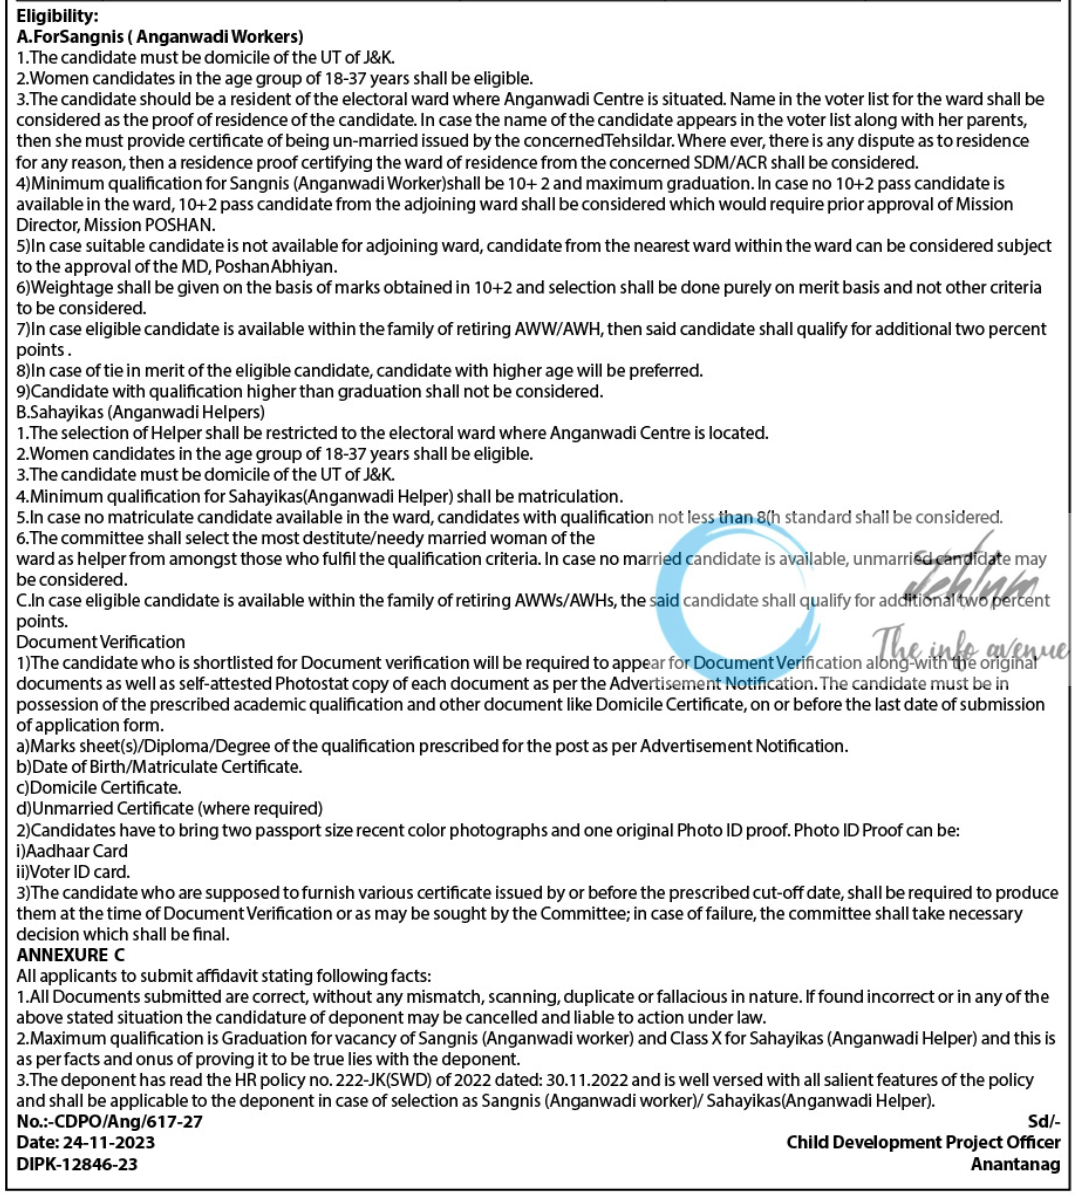 CHILD DEVELOPMENT PROJECT OFFICER ANANTNAG ADVERTISEMENT NOTICE NO 04 OF 2023